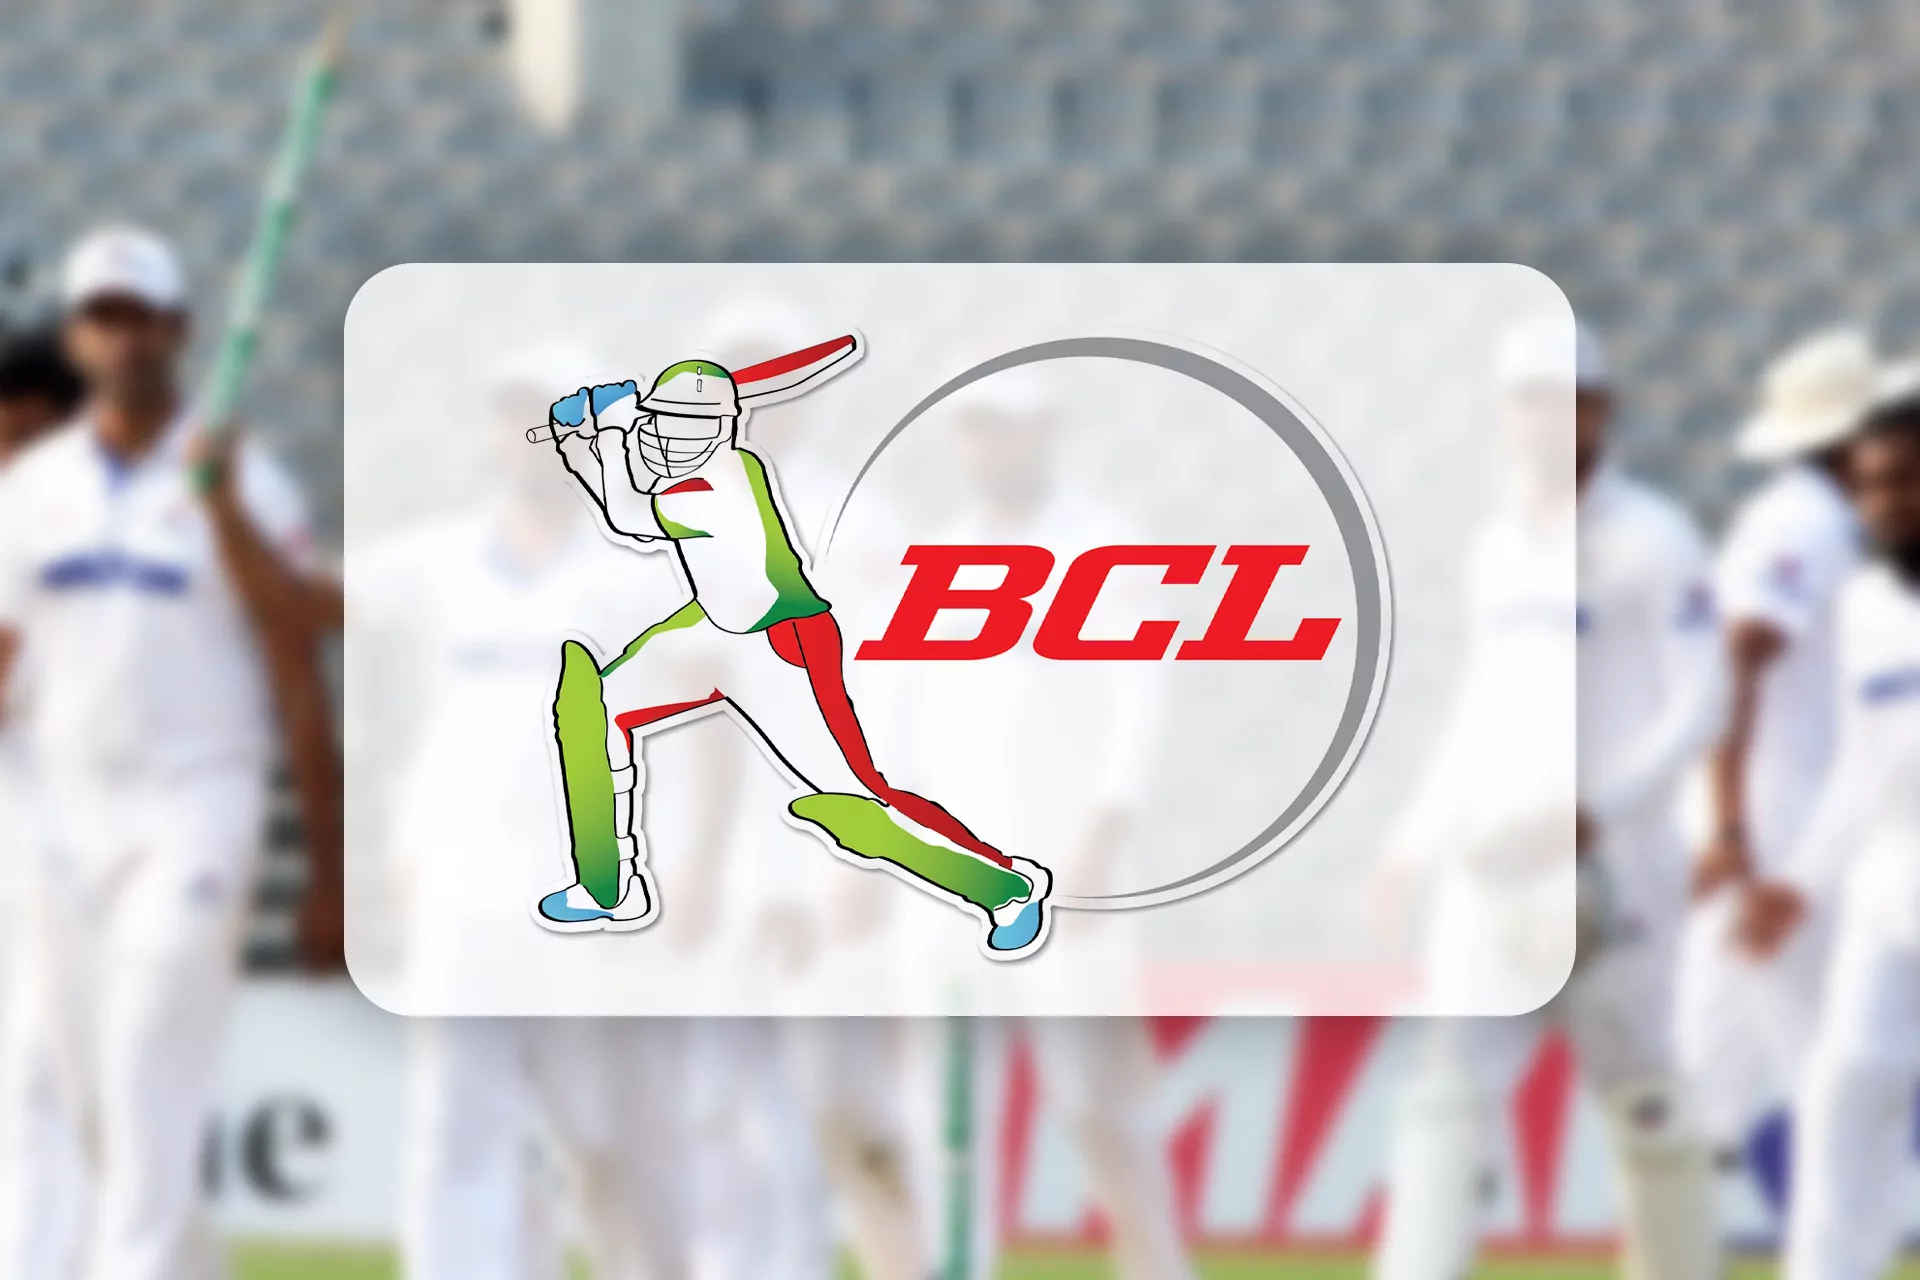 Bangladesh Cricket League is one of the most important sports events in the cricket world.